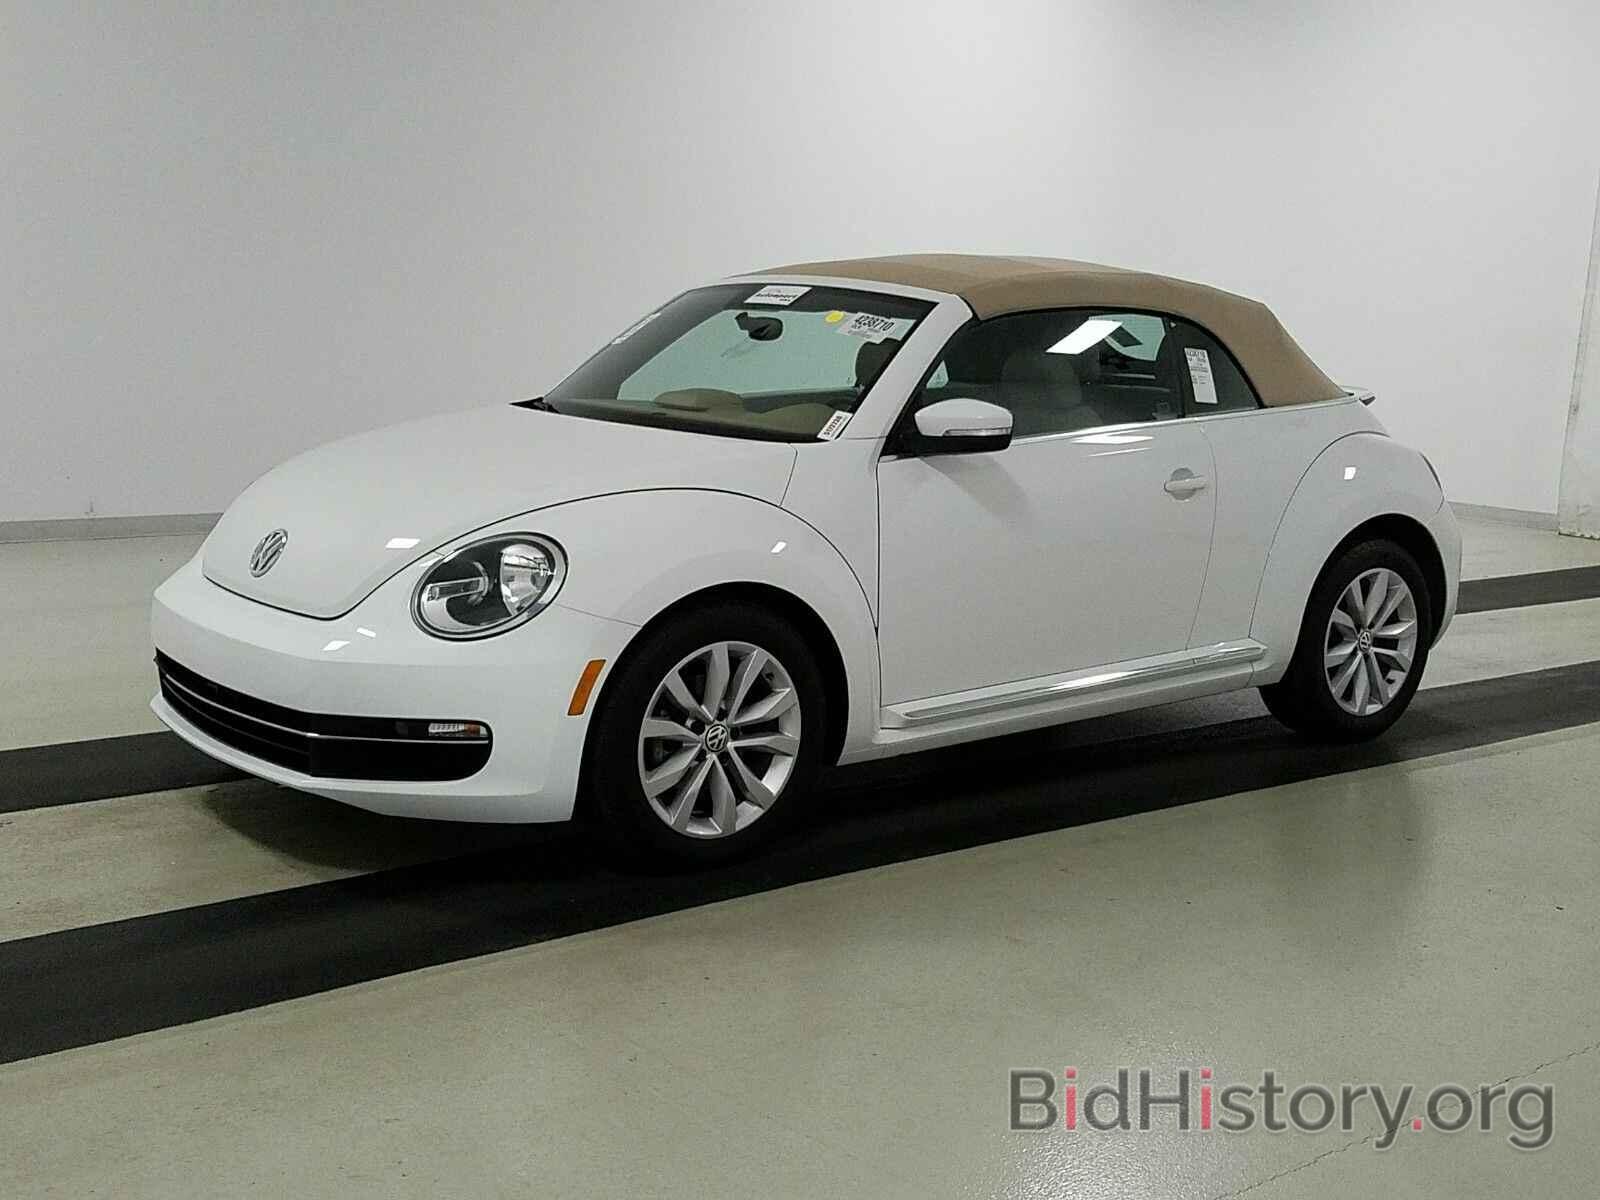 Photo 3VW5A7AT6FM818520 - Volkswagen Beetle Convertible 2015